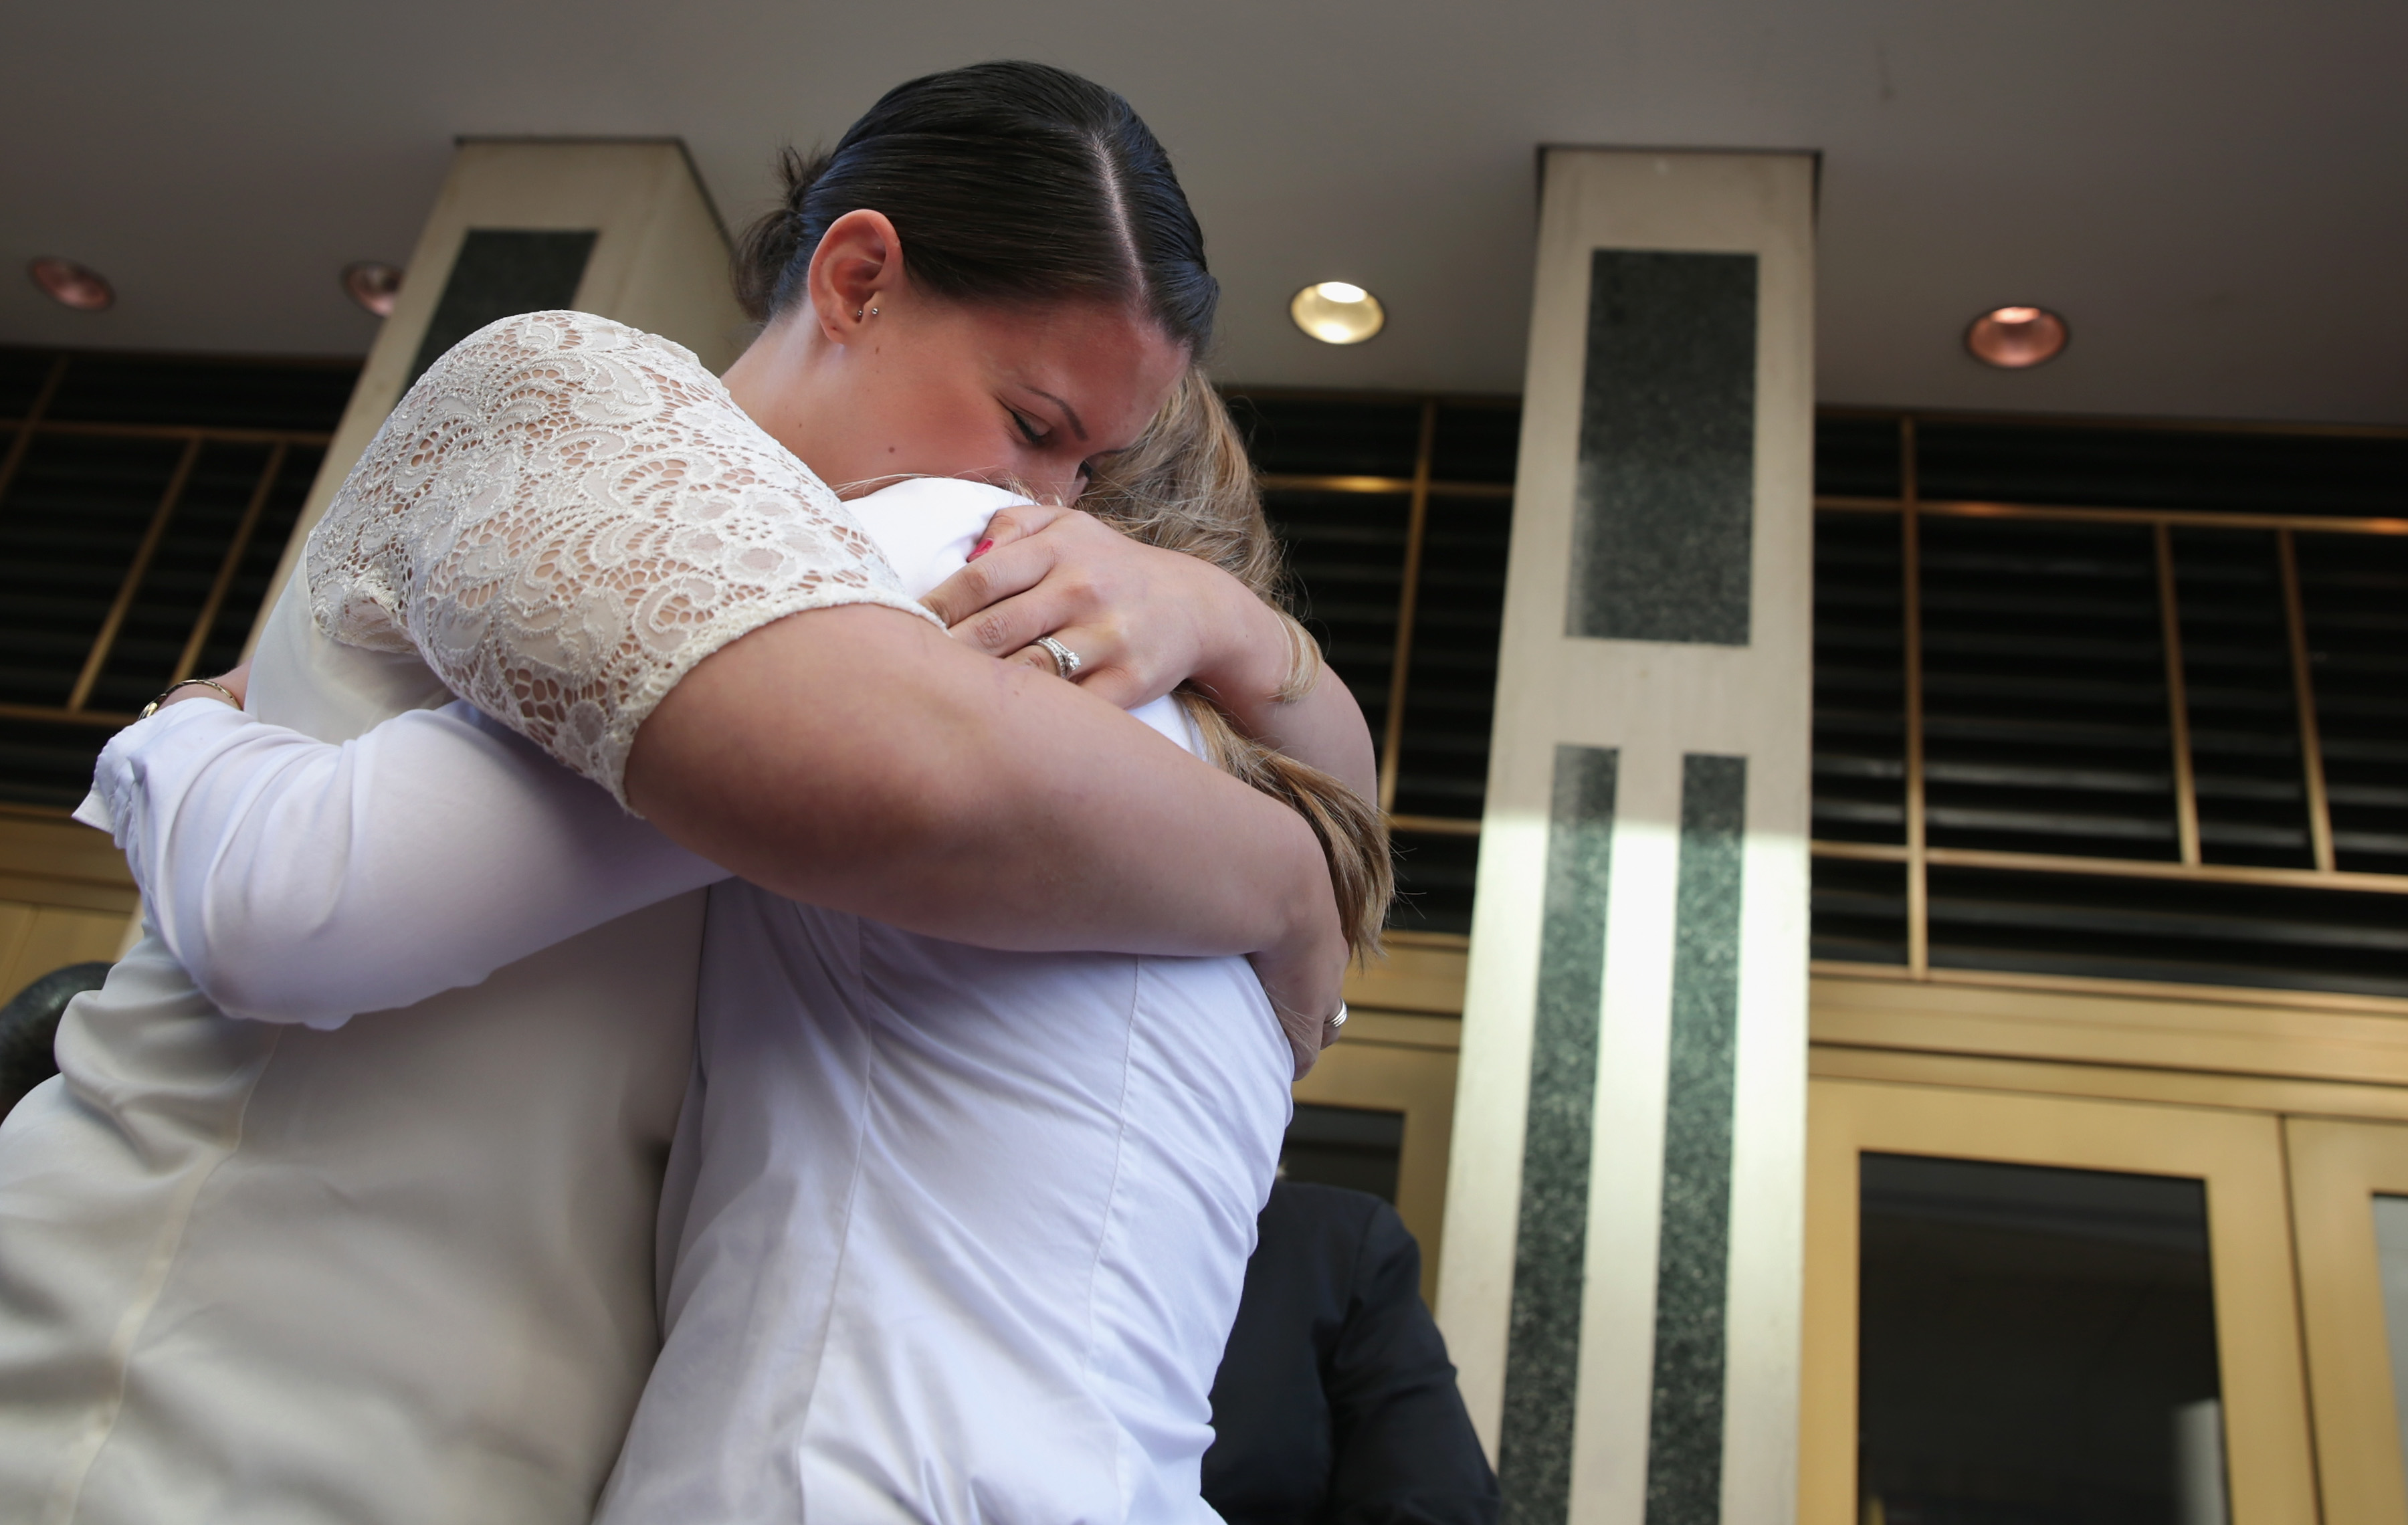 Erika Turner and Jennifer Melsop of Centreville, Va., embrace each other after they became the first same-sex married couple in Arlington County at the Arlington County Courthouse in Arlington, Va., on Oct. 6, 2014 (Alex Wong&mdash;Getty Images)